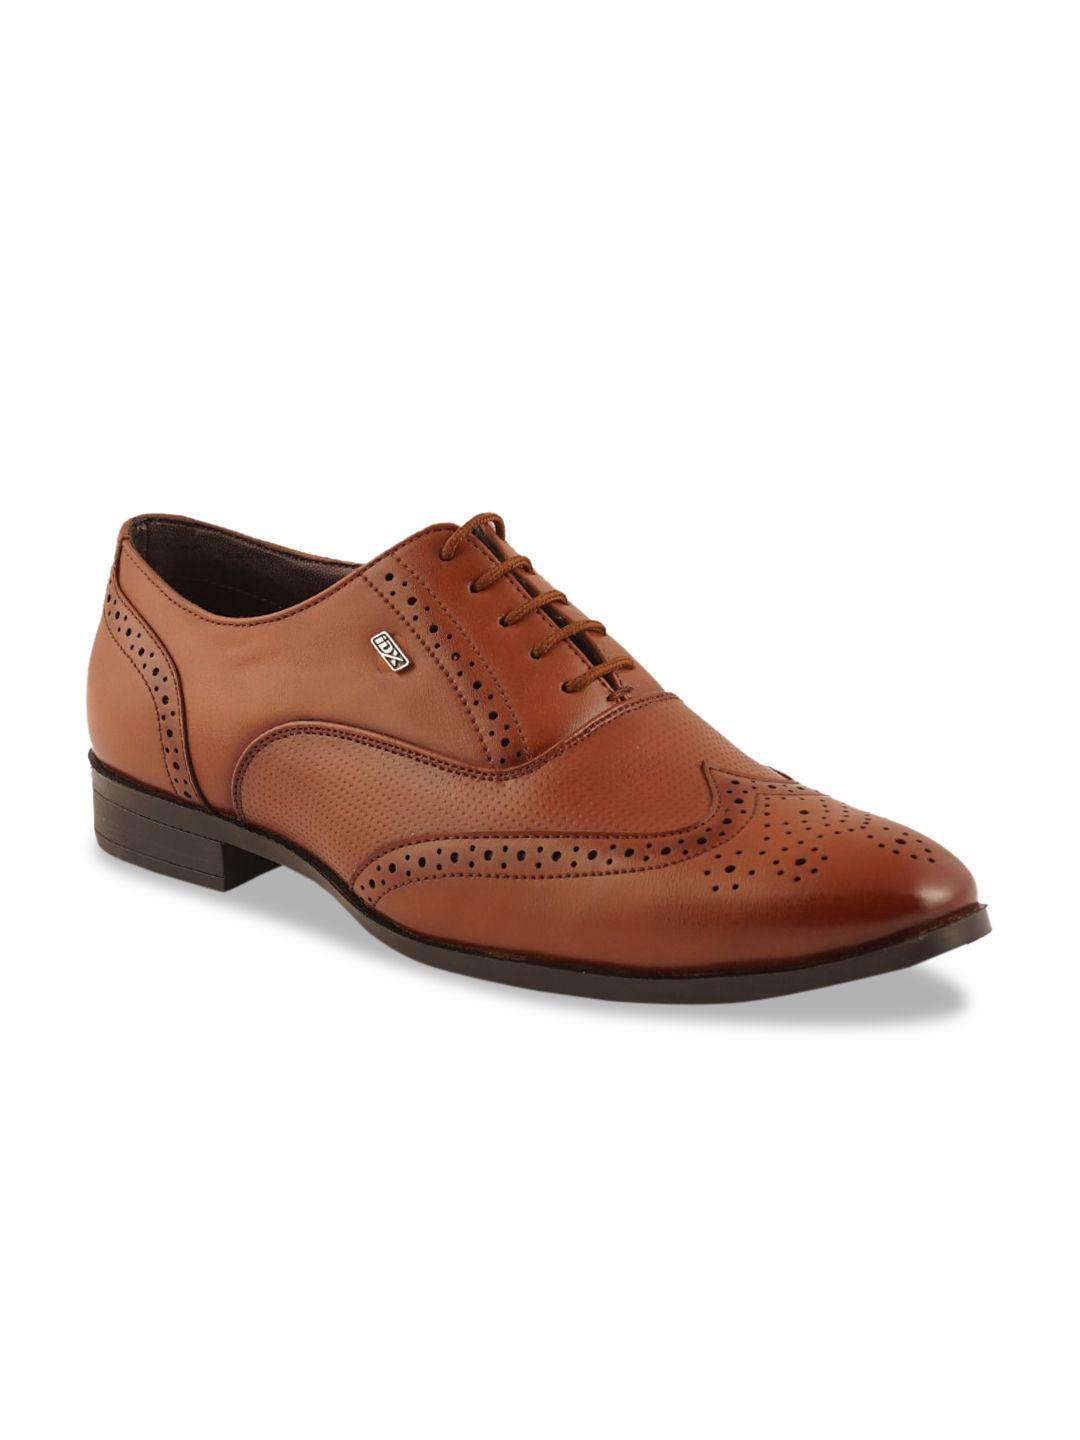 id-men-tan-lace-up-formal-shoes